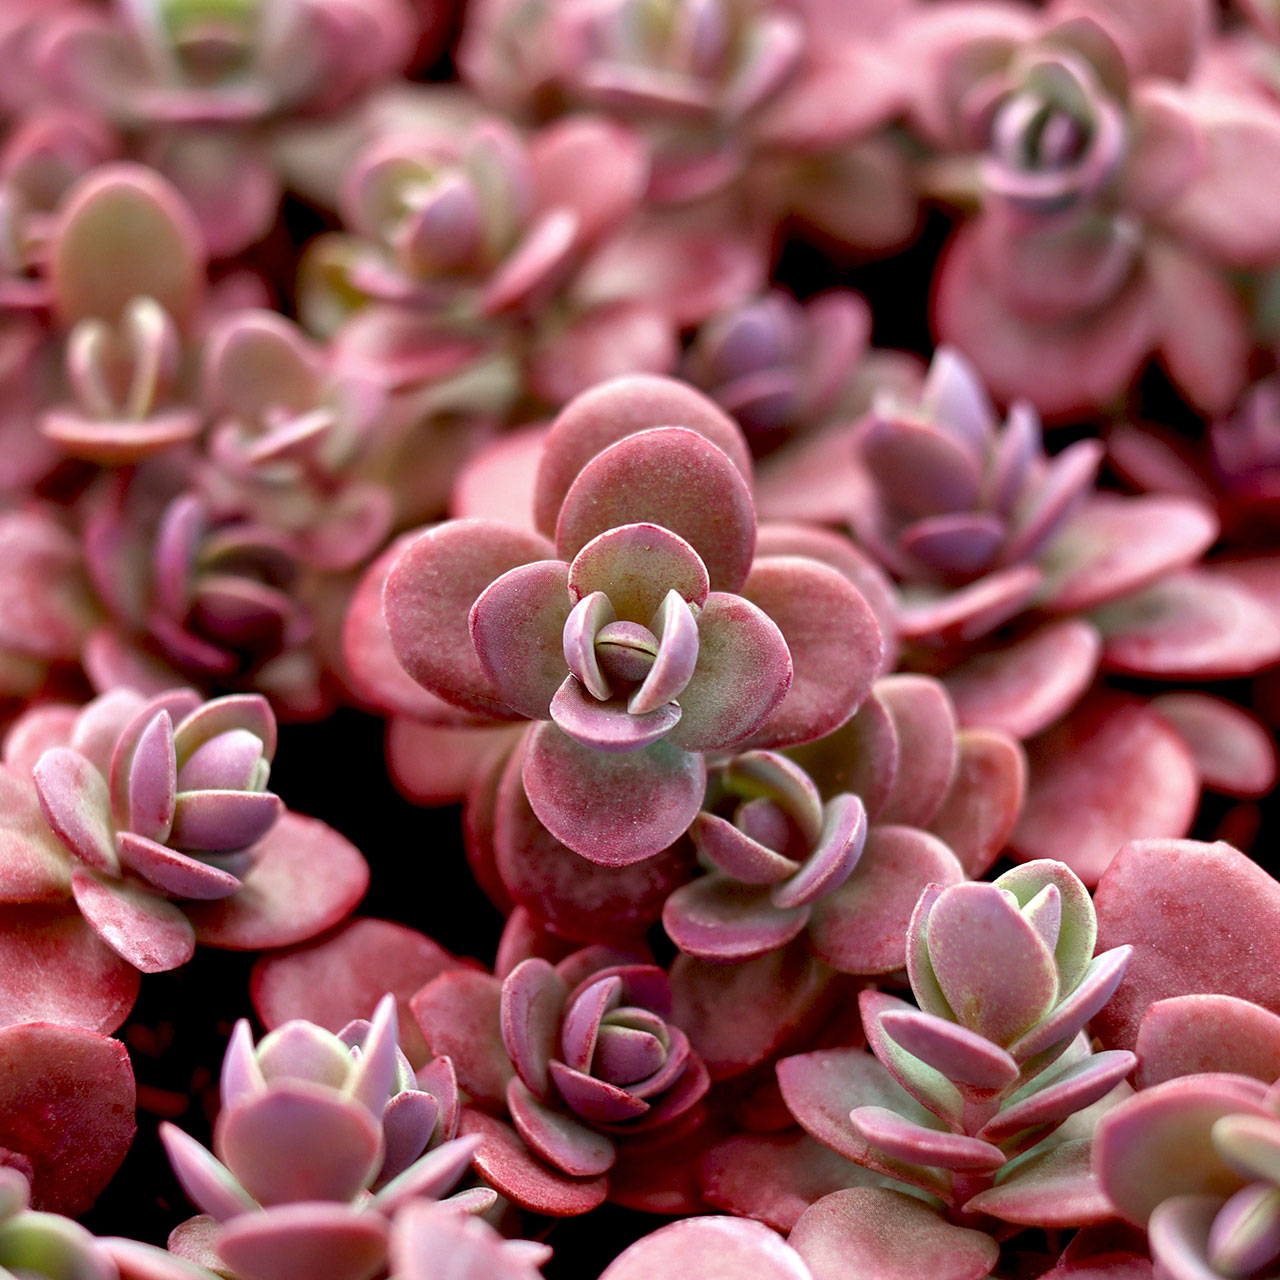 Do you have to let sedums cut stems dry before replanting?